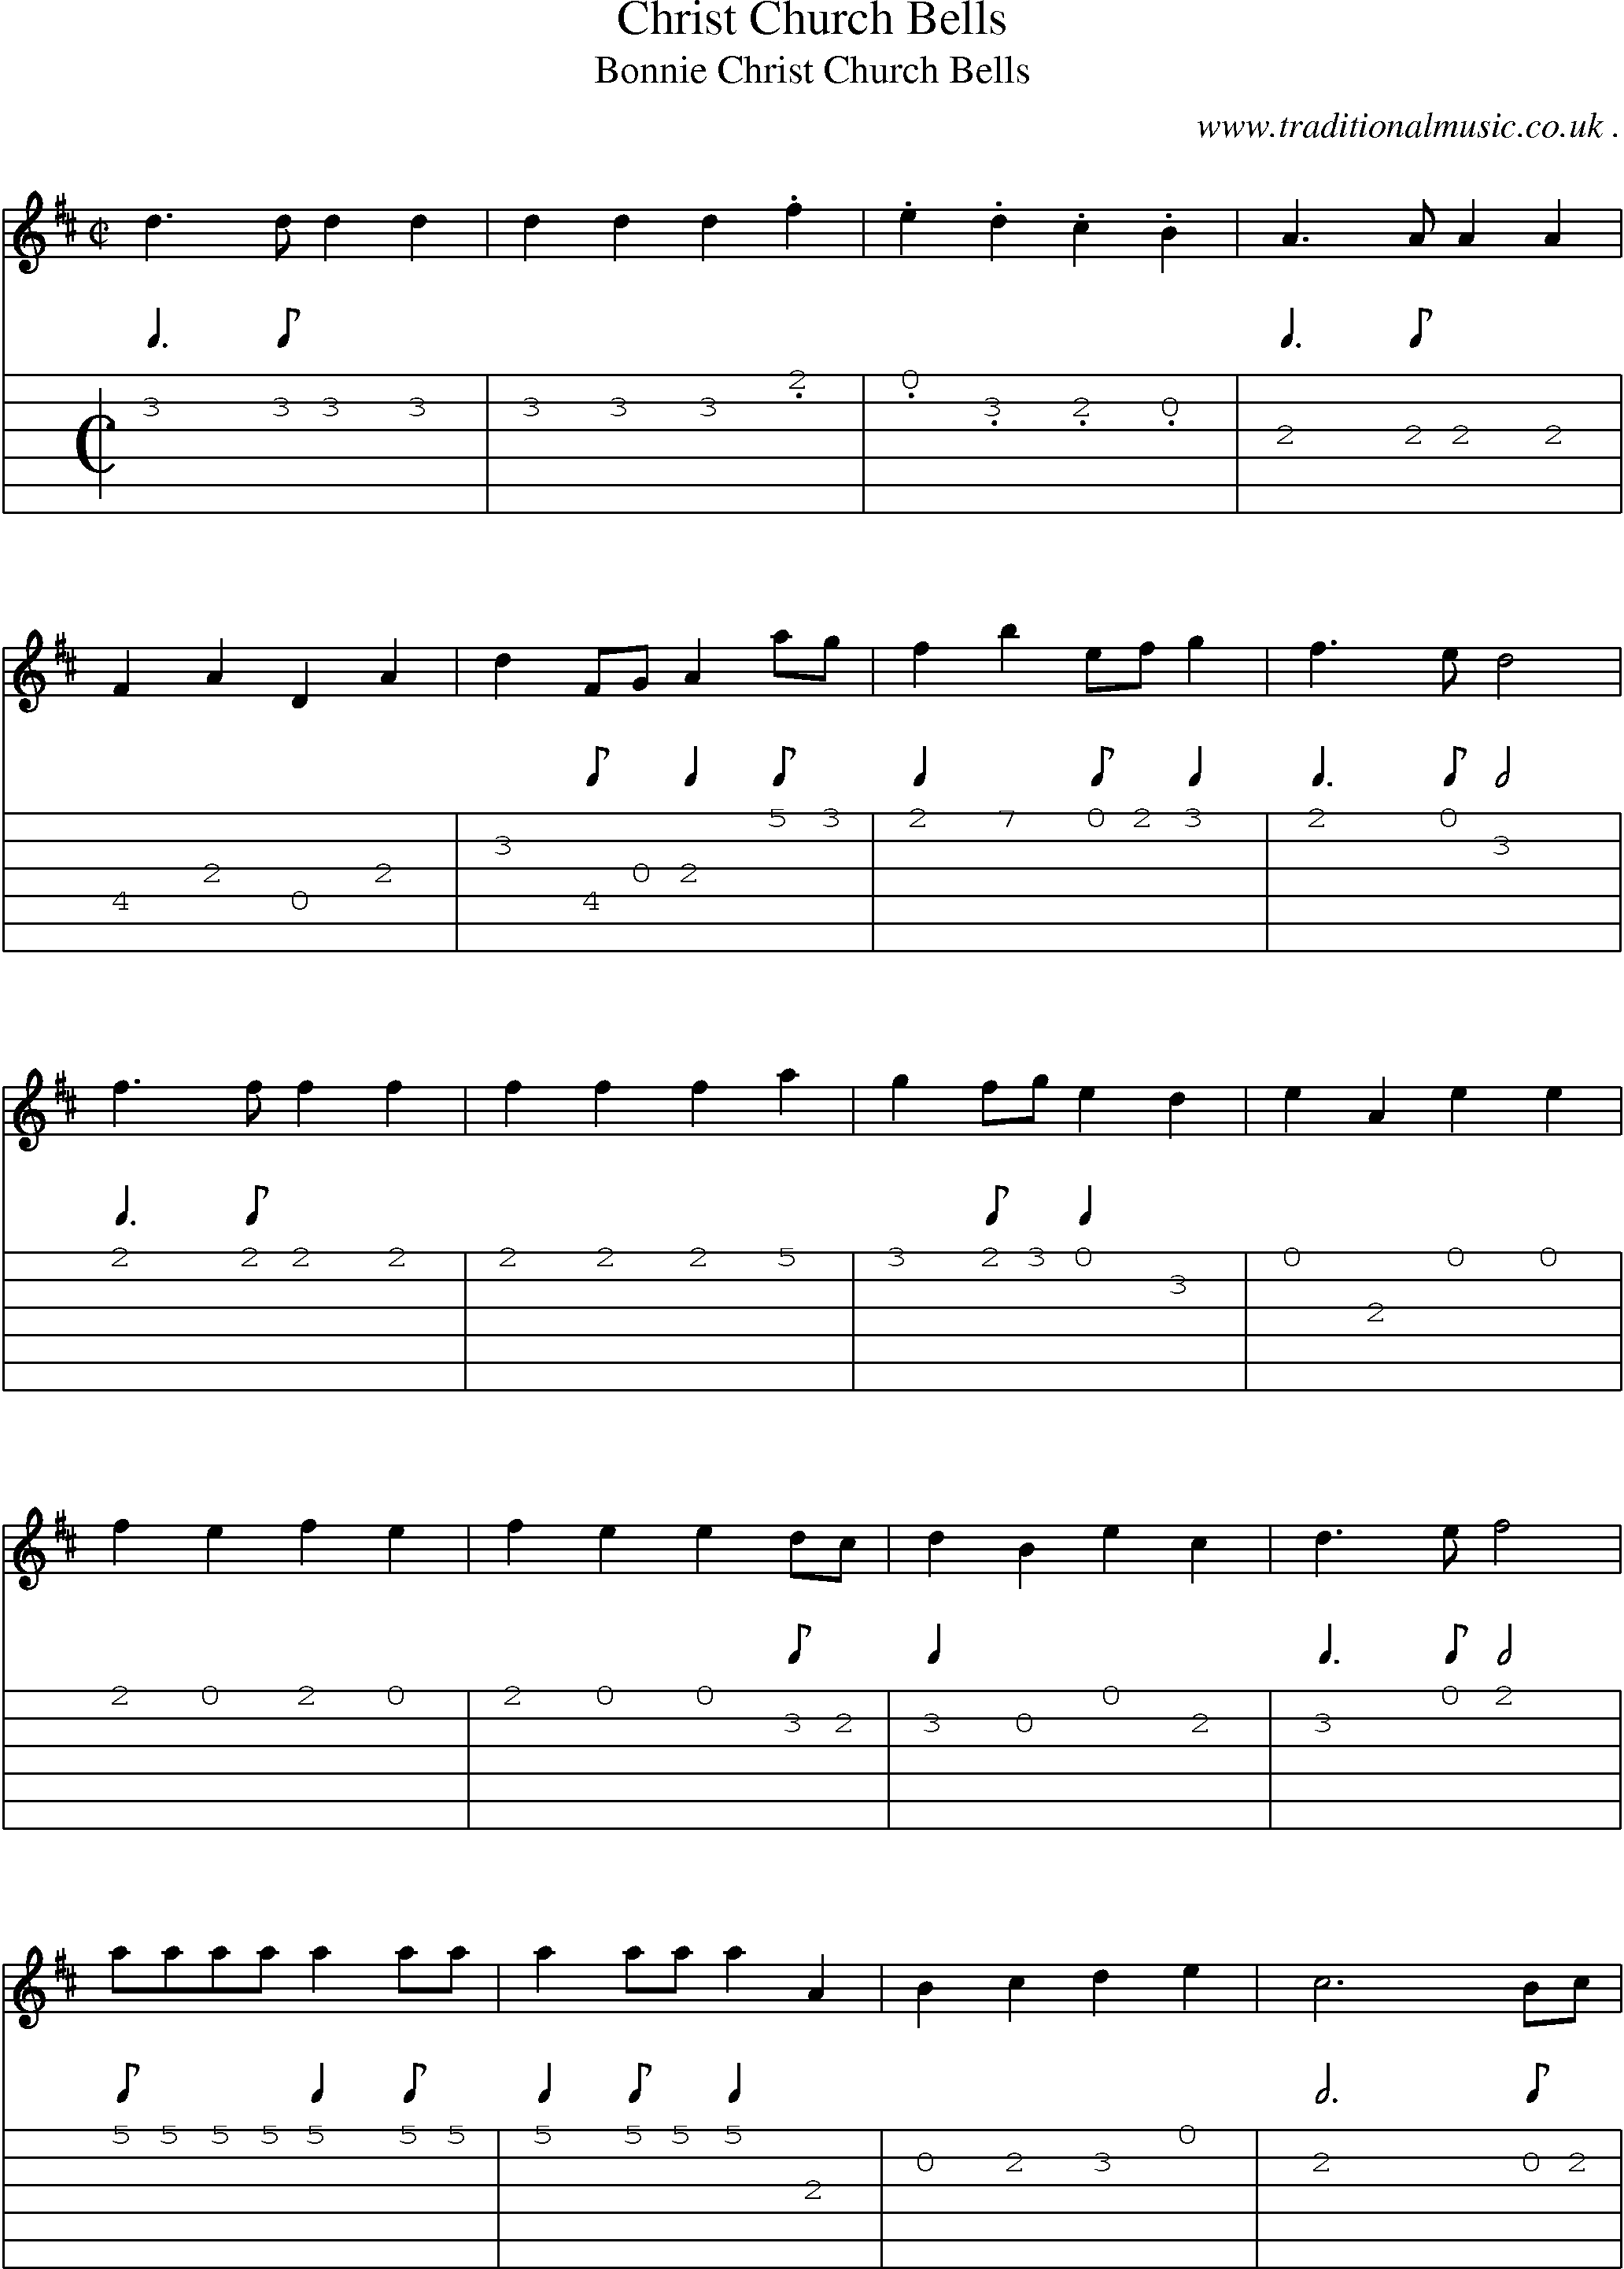 Sheet-Music and Guitar Tabs for Christ Church Bells